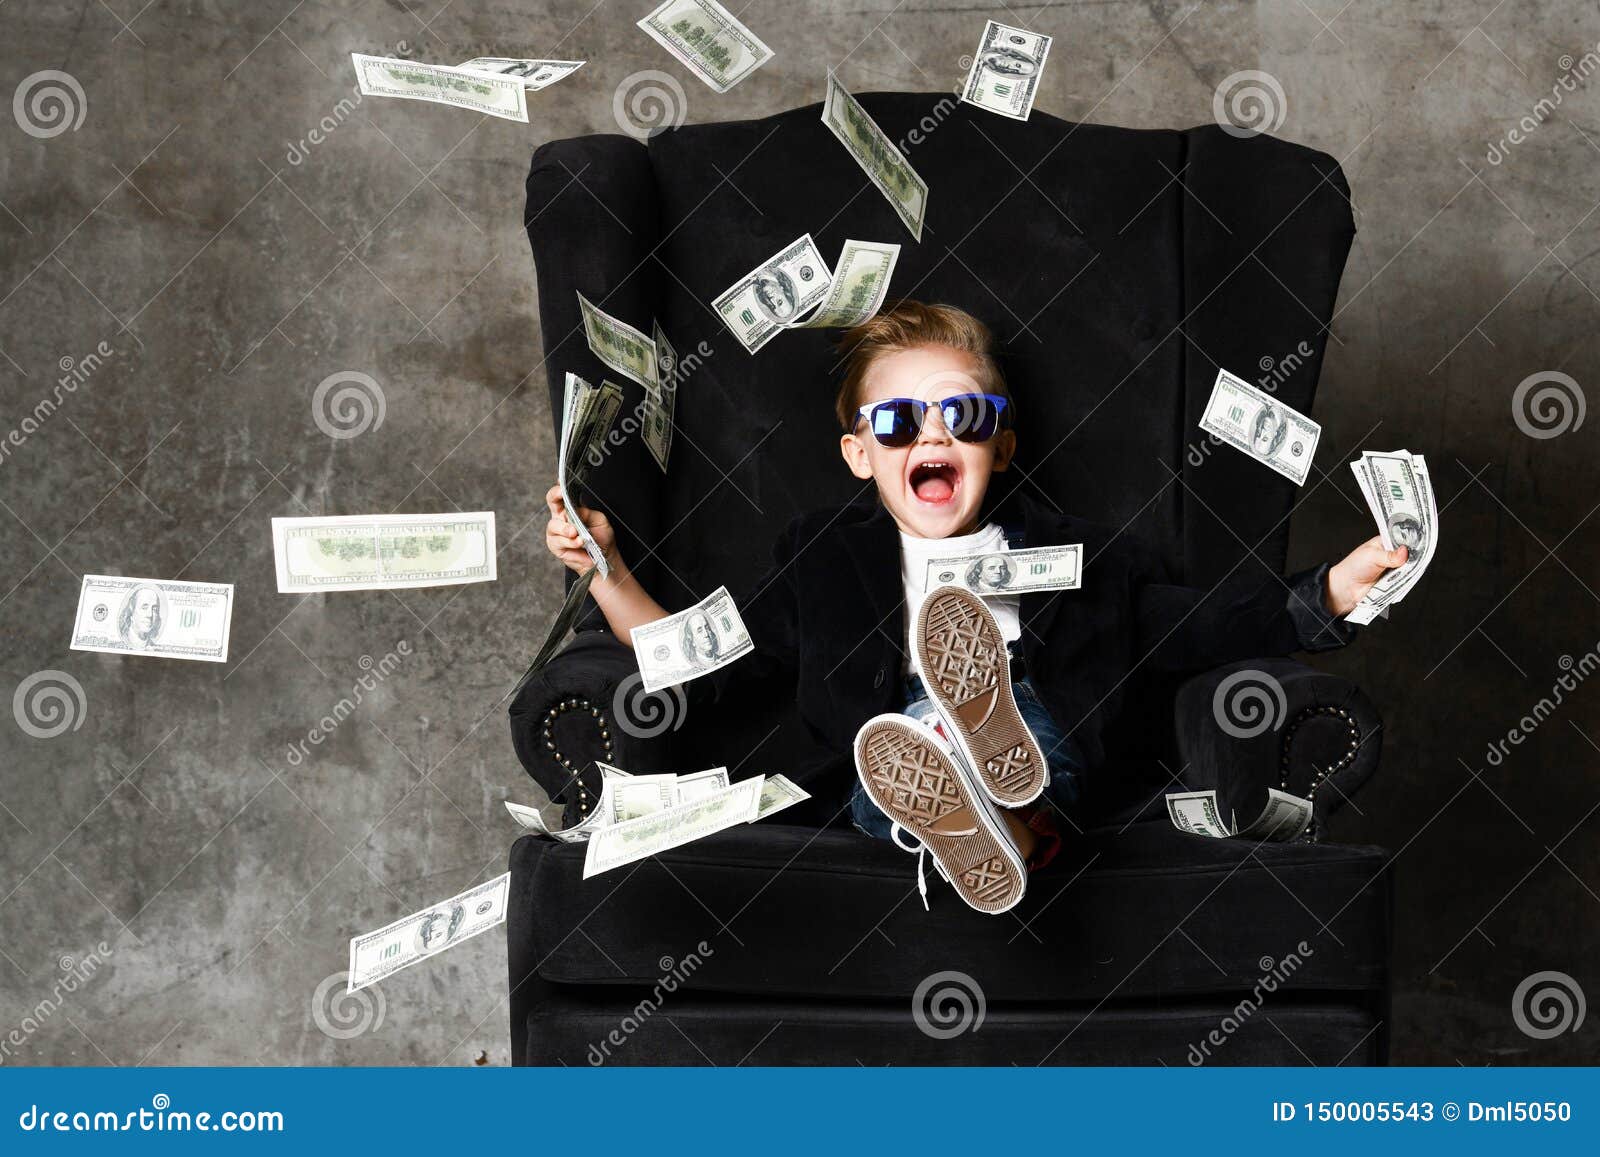 portrait of happy shouting self-confident rich kid boy millionaire sitting in luxury armchair and throwing money dollars cash